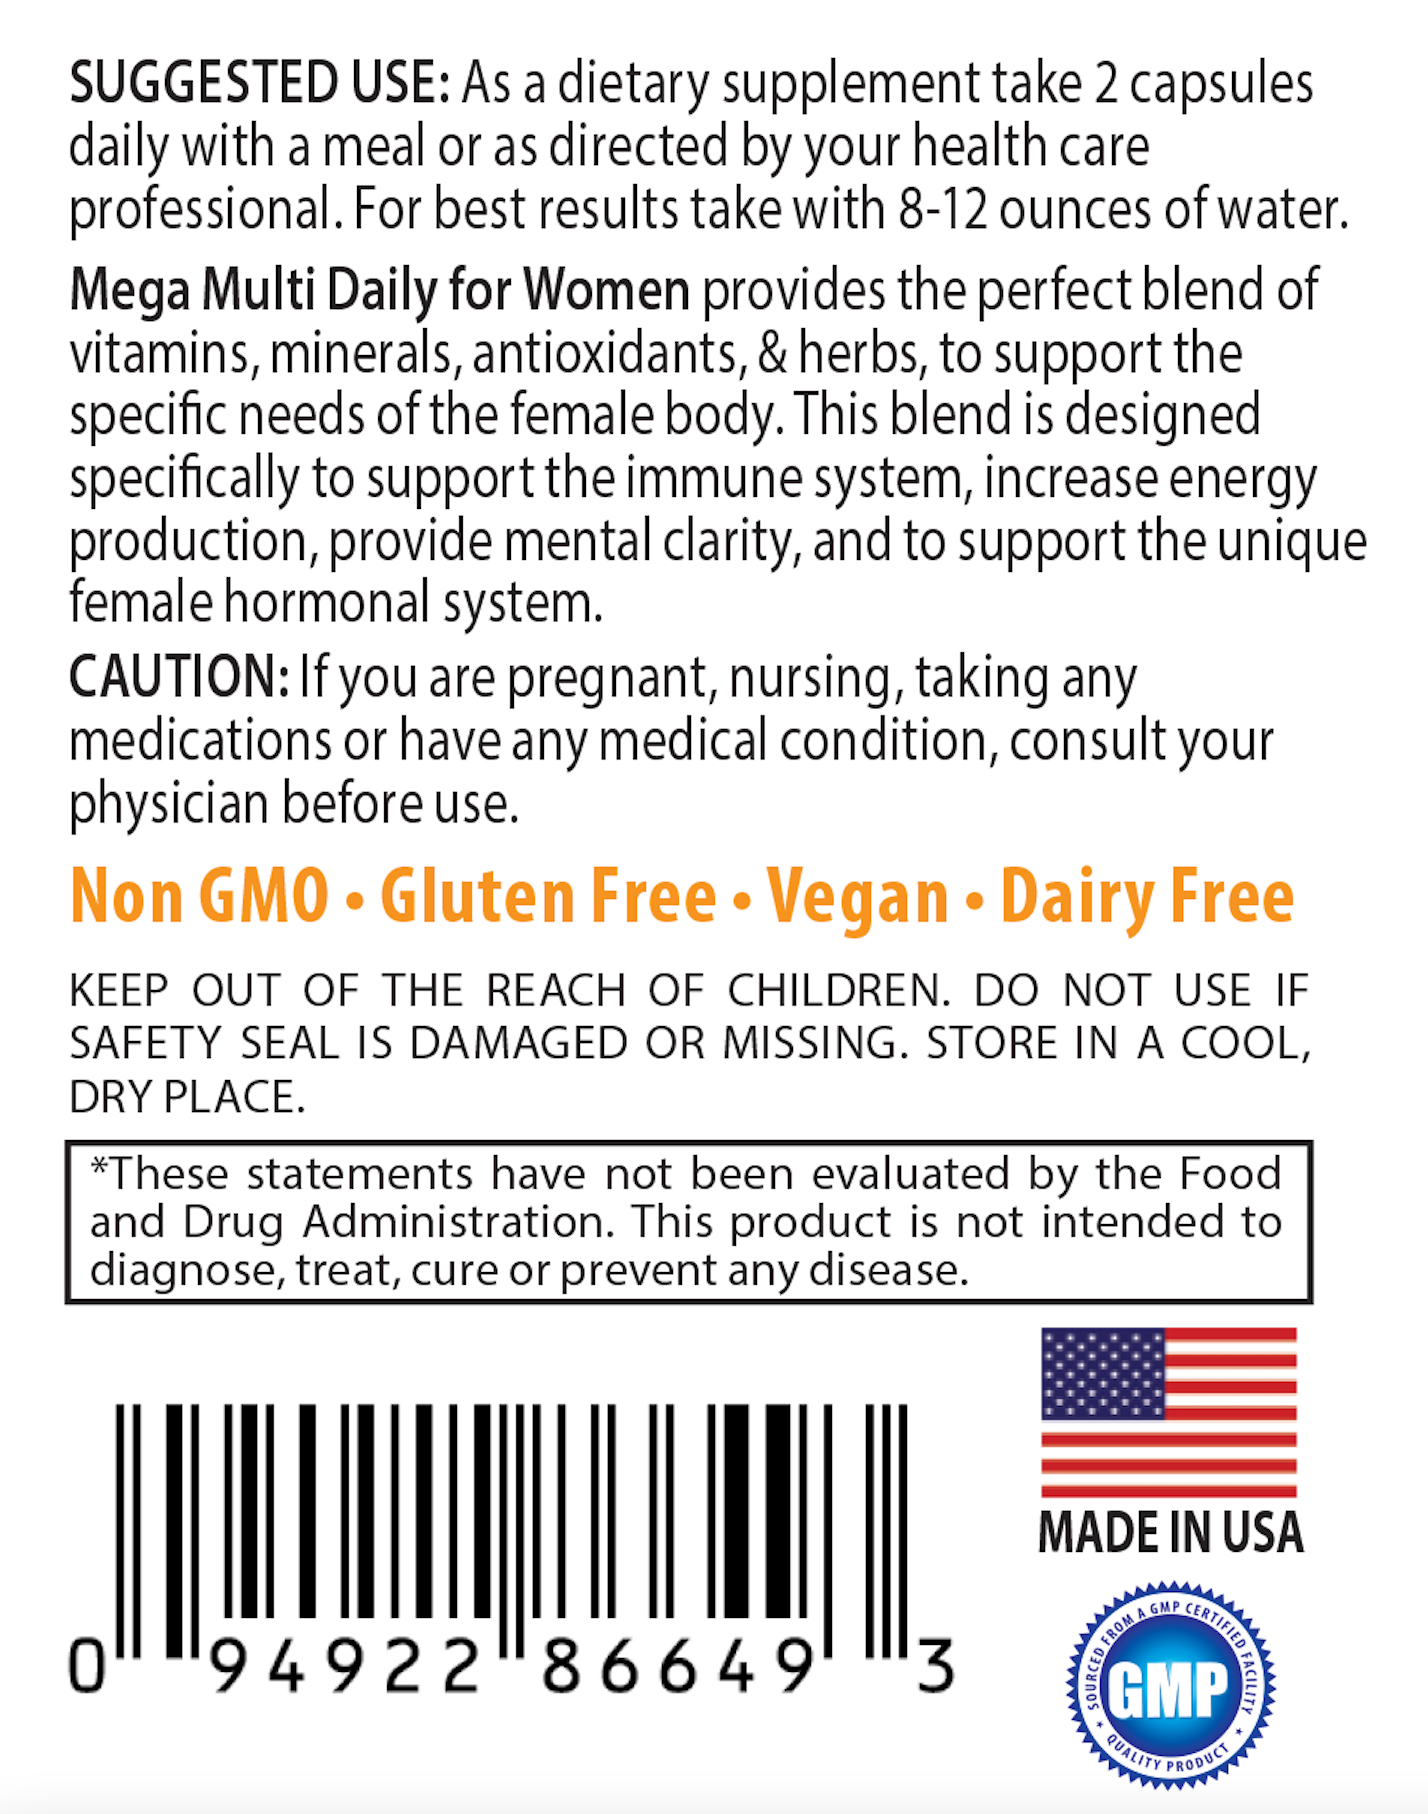 Mega Multi Daily For Women Suggested Use